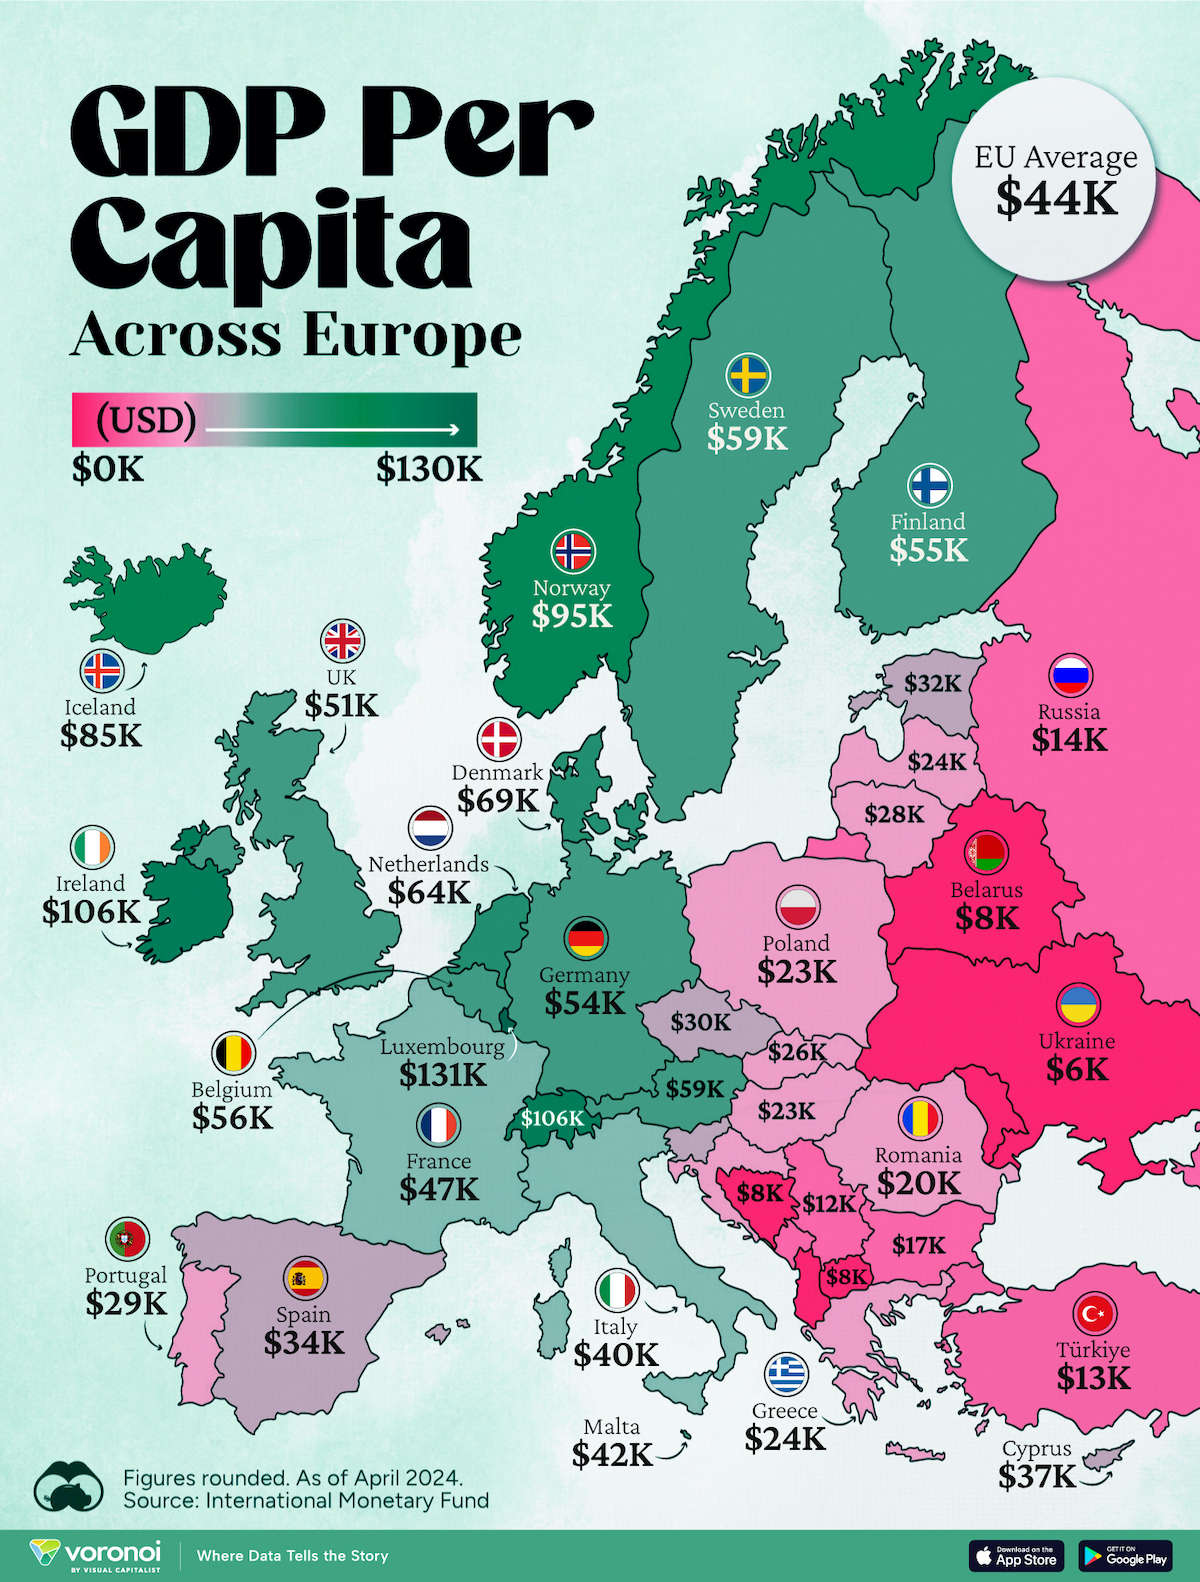 A map of GDP per capita levels for 44 European countries.